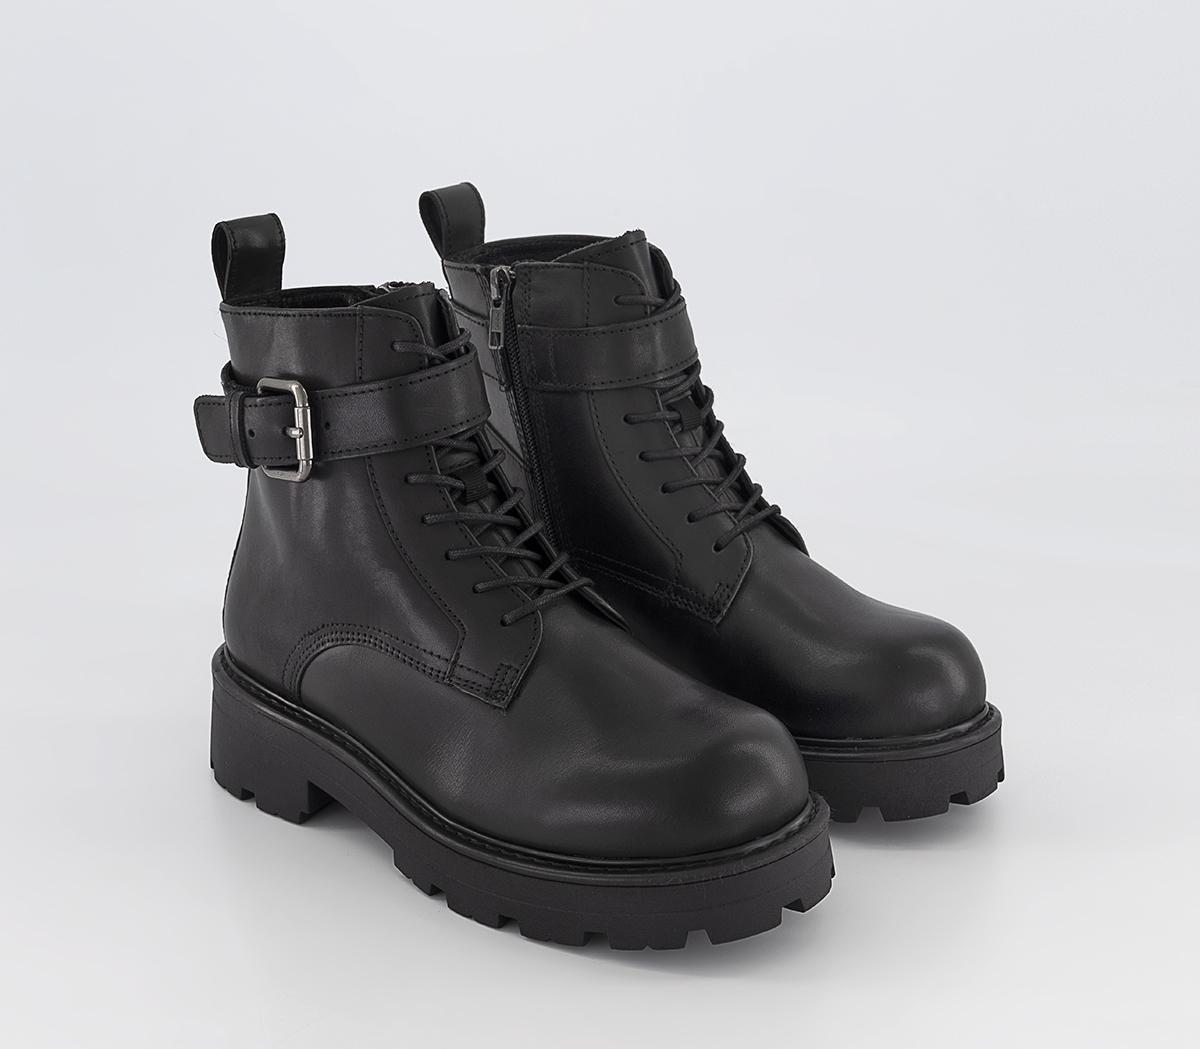 Vagabond Shoemakers Cosmo 2.0 Lace Up Buckle Boots Black - Women's ...